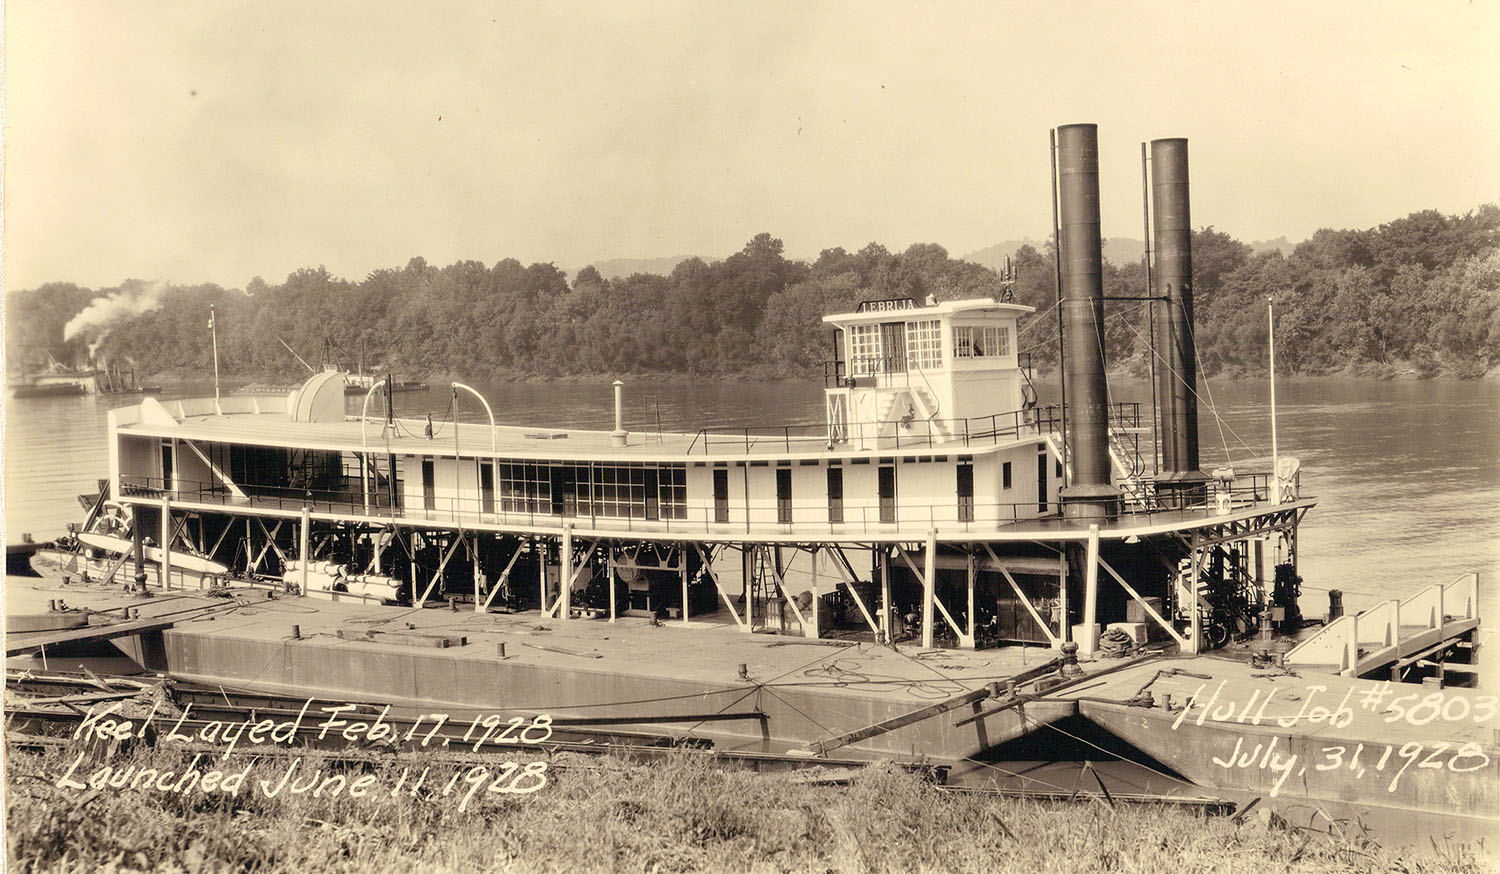 The Towboat Lebrija undergoing completion at Marietta Manufacturing. (Keith Norrington collection)